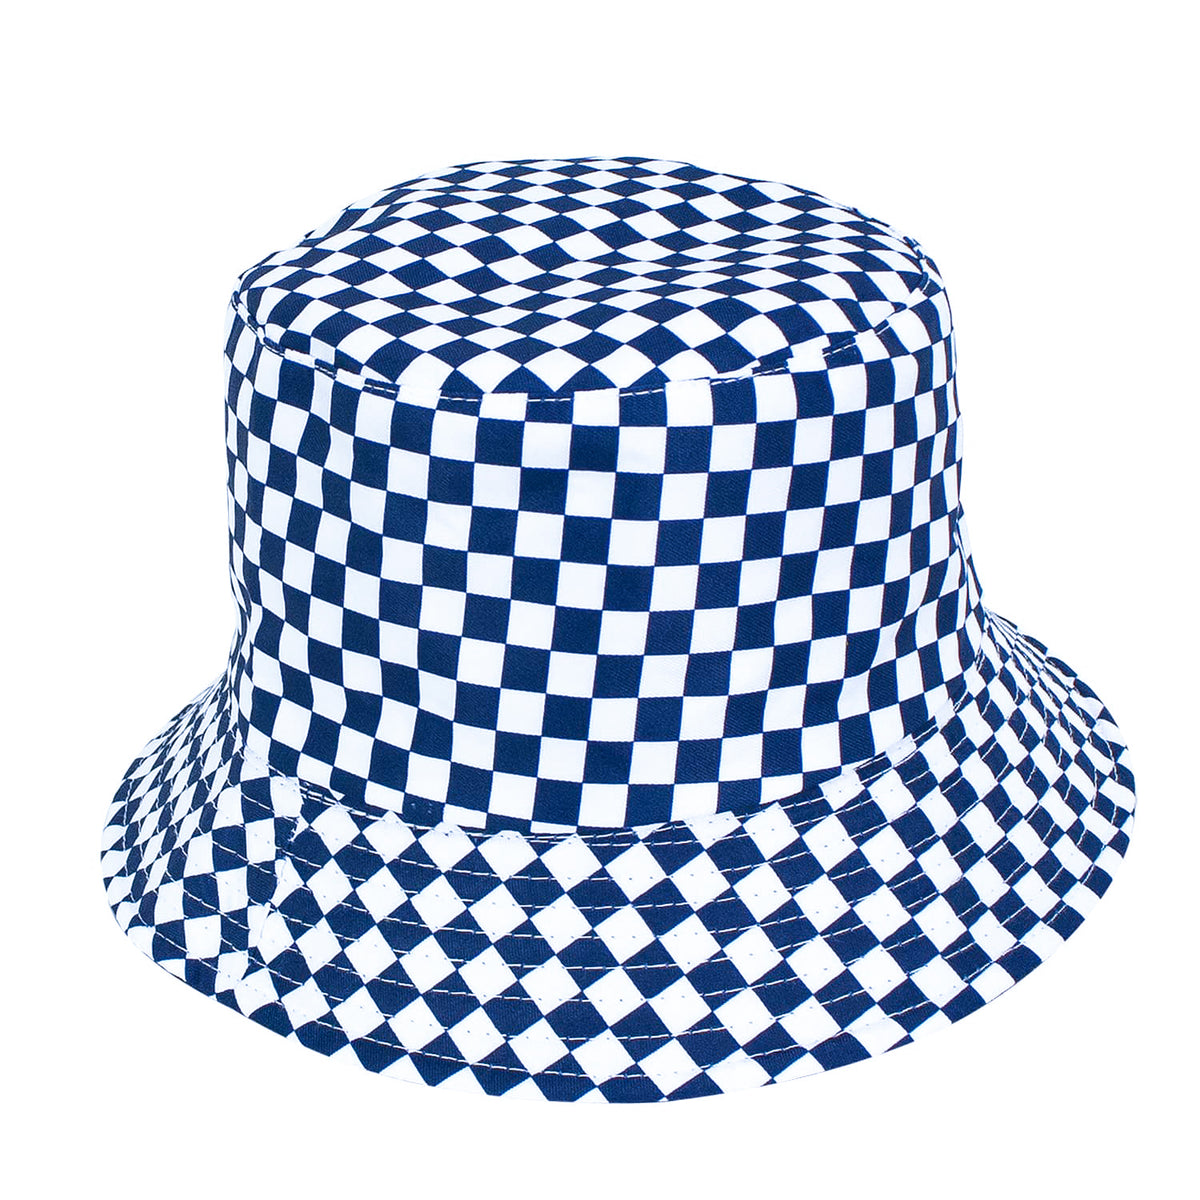 Retro Plaid Stingy Brim Navy Blue Bucket Hat High Grade Luxury Fisheman Hat  For Outdoor Street Style And Sun Visor From Nxink, $34.37